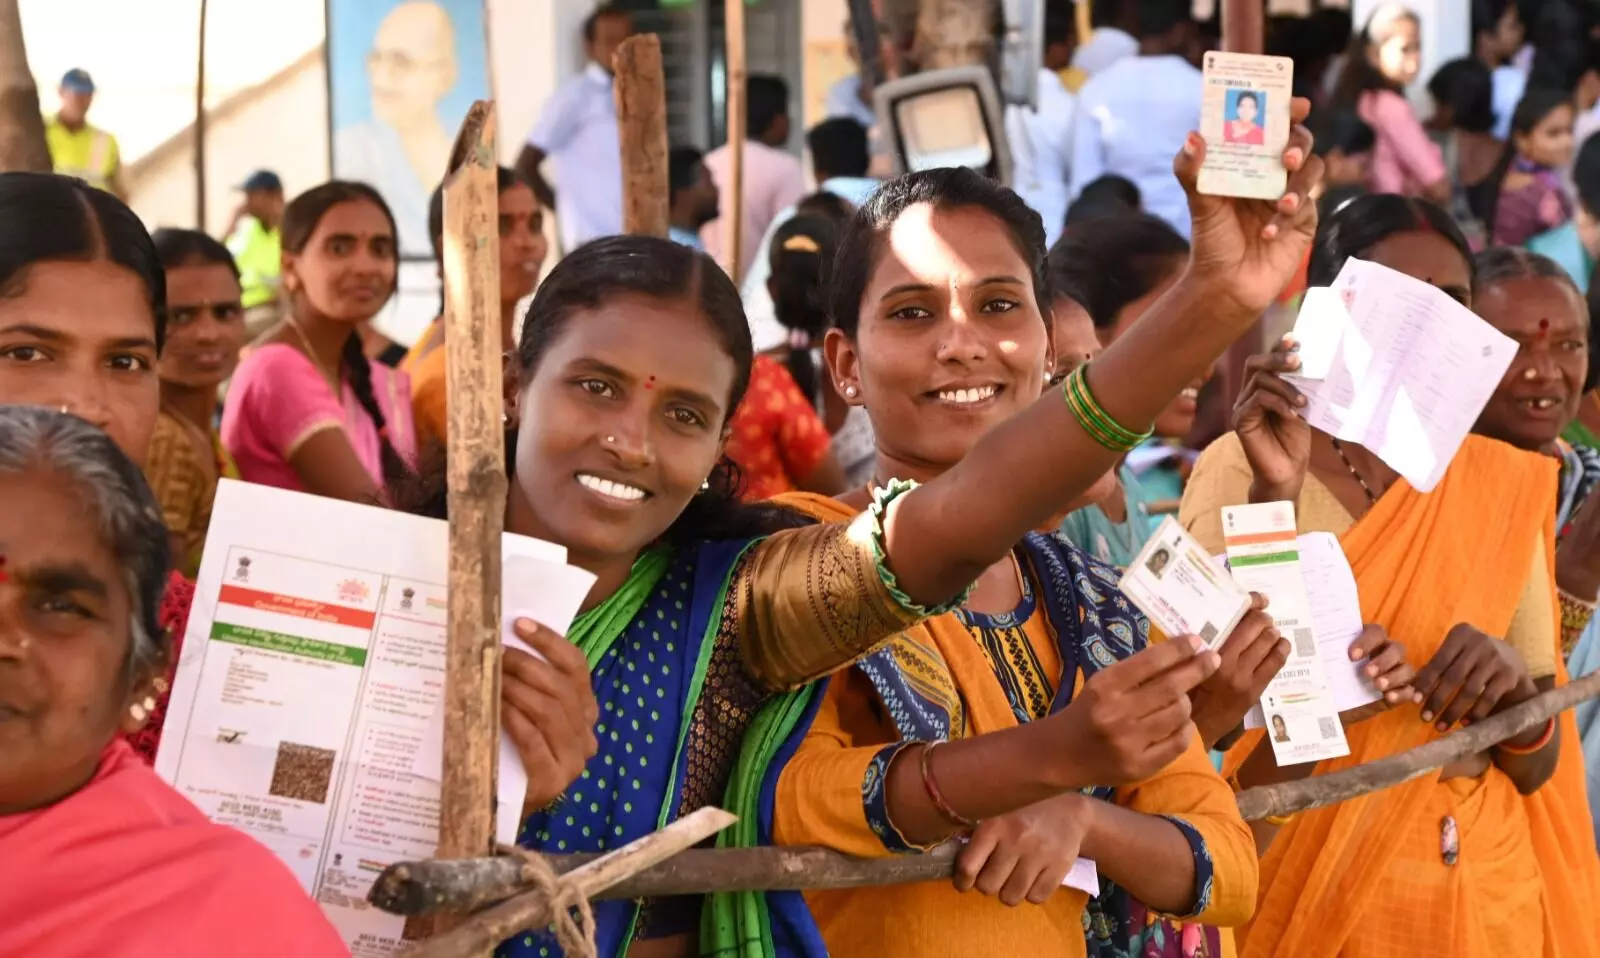 Telangana records 63.94% voter turnout, Hyderabad fares poorly with 40.69% till 5 pm in Assembly polls